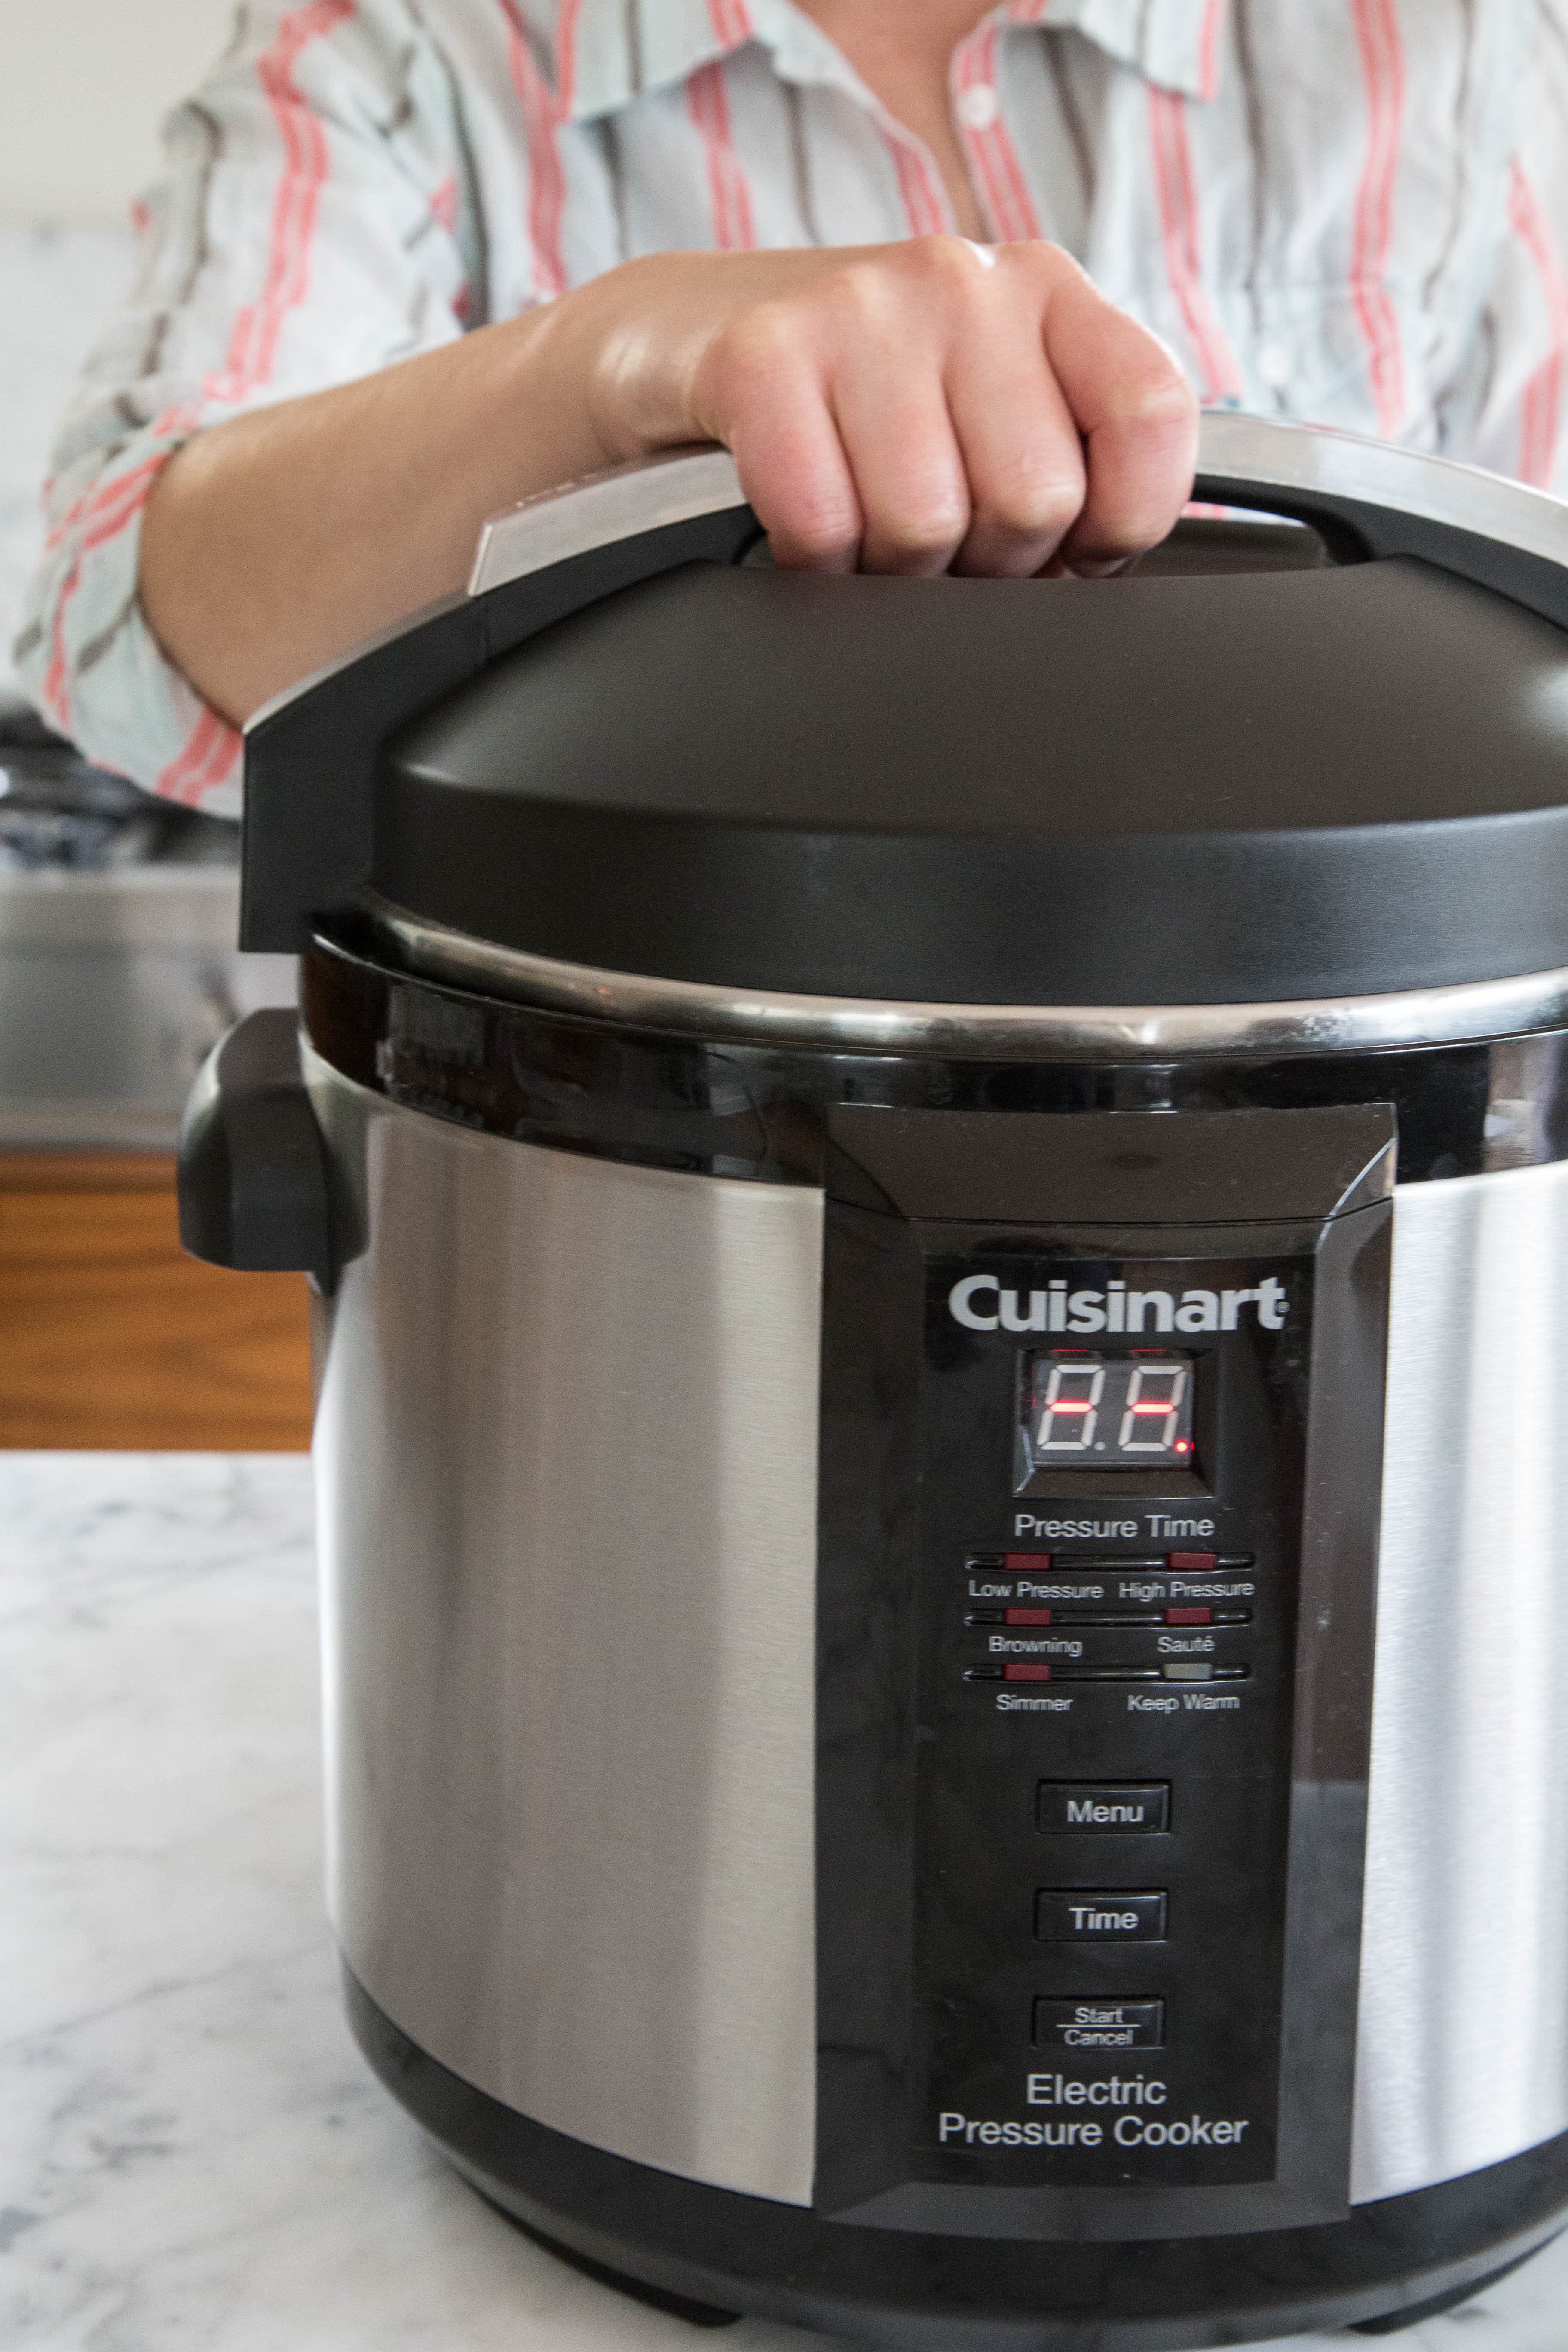 5 Mistakes to Avoid When Using an Electric Pressure Cooker